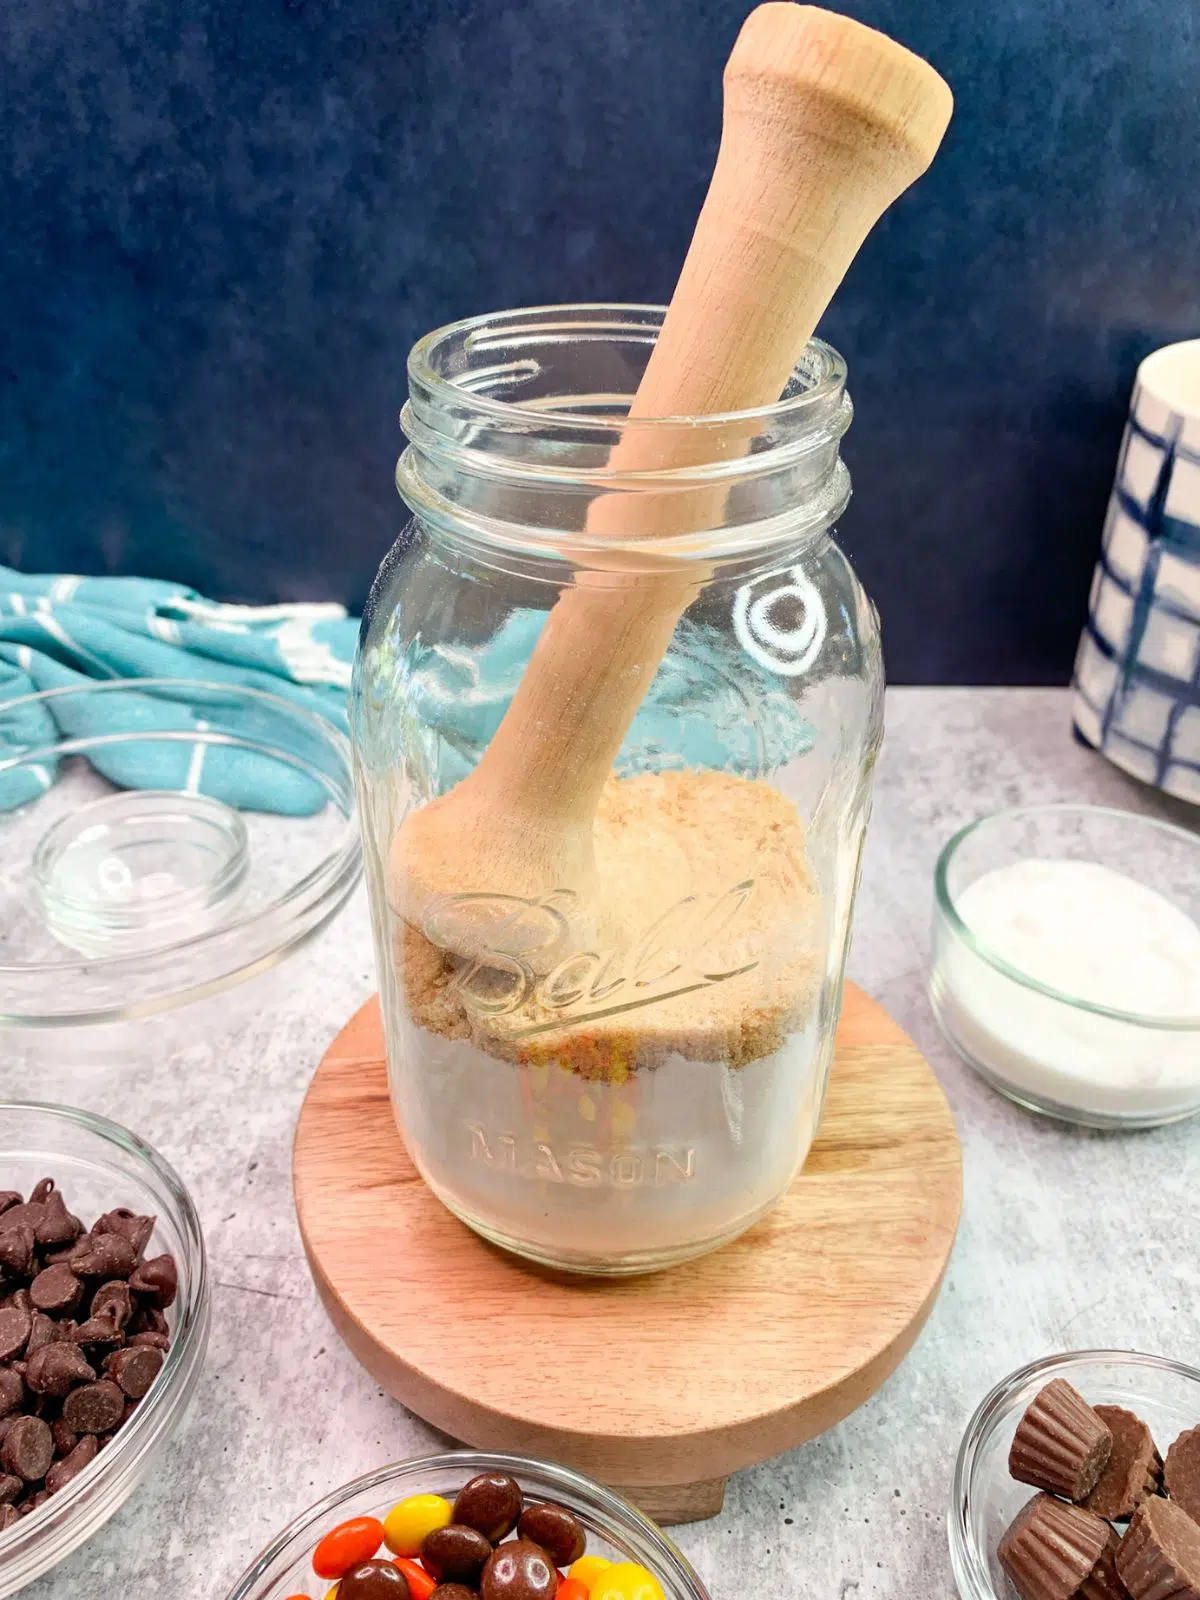 Use tamper tart tool to even out ingredients in mason jar.